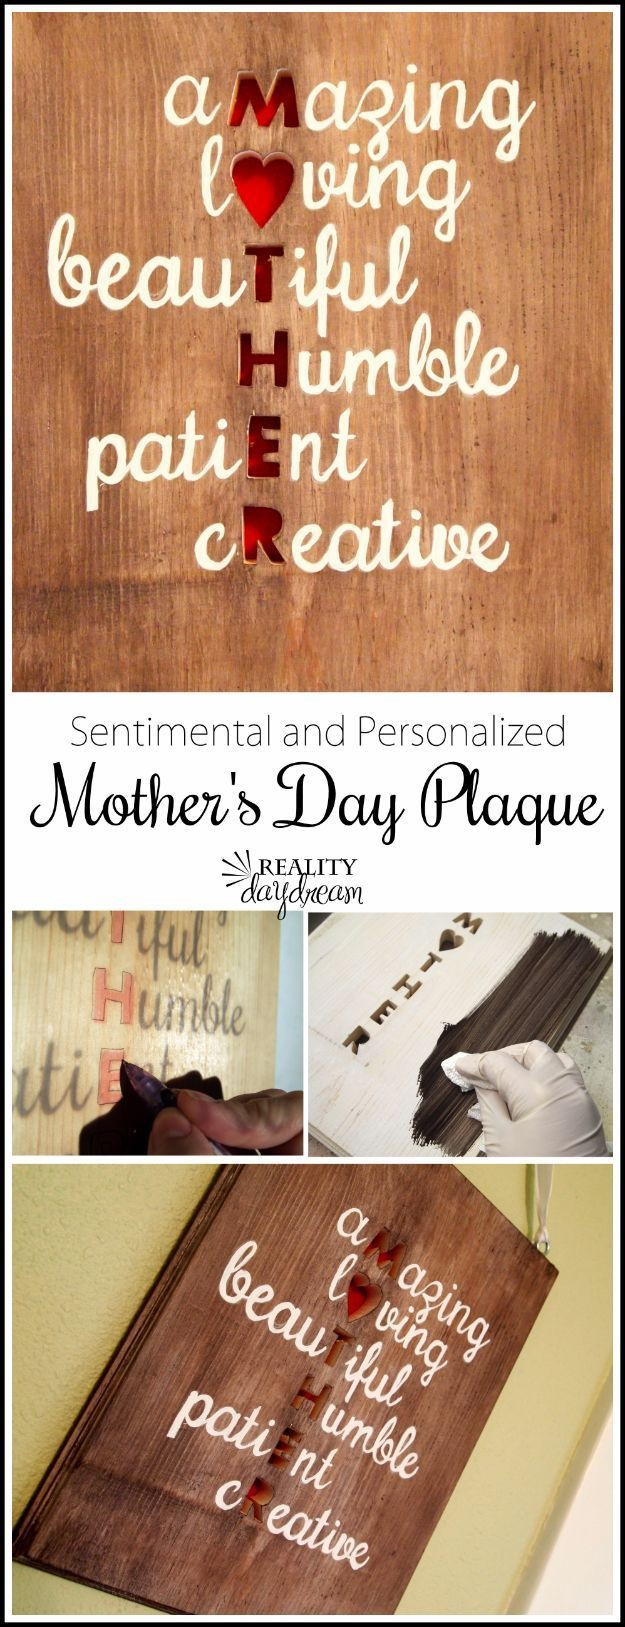 Birthday Gift Ideas For Mom From Son
 35 Creatively Thoughtful DIY Mother s Day Gifts